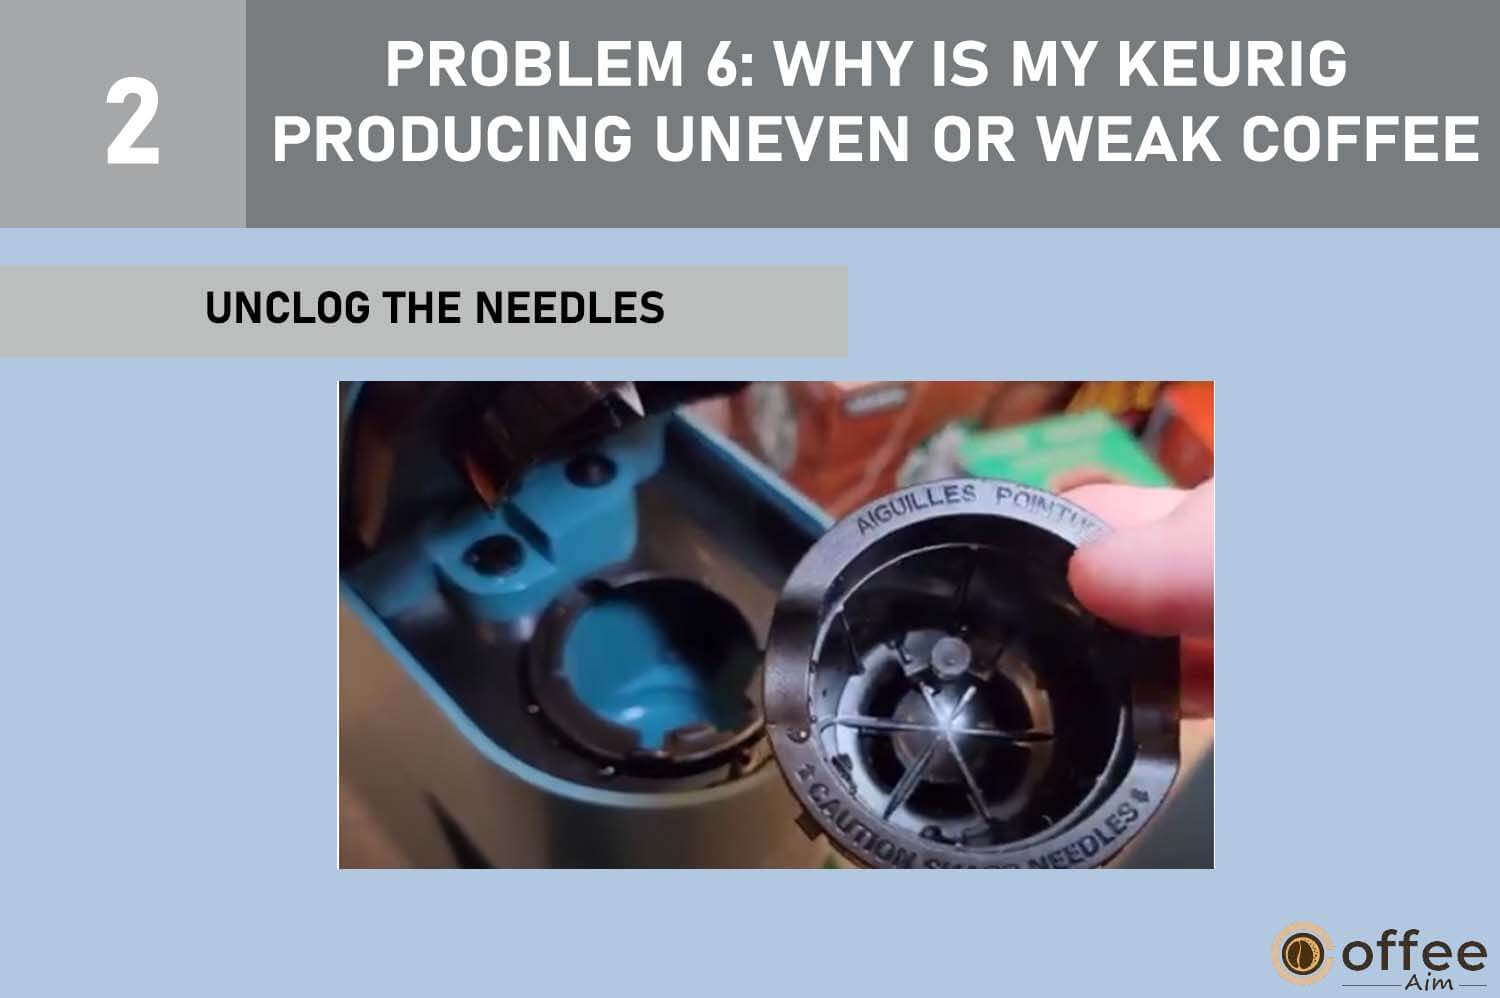 This image demonstrates the process of "Unclogging the Needles" to address Problem 6: "Why is My Keurig Producing Uneven or Weak Coffee?" as discussed in our "Keurig K-Mini Plus Problems" article.




